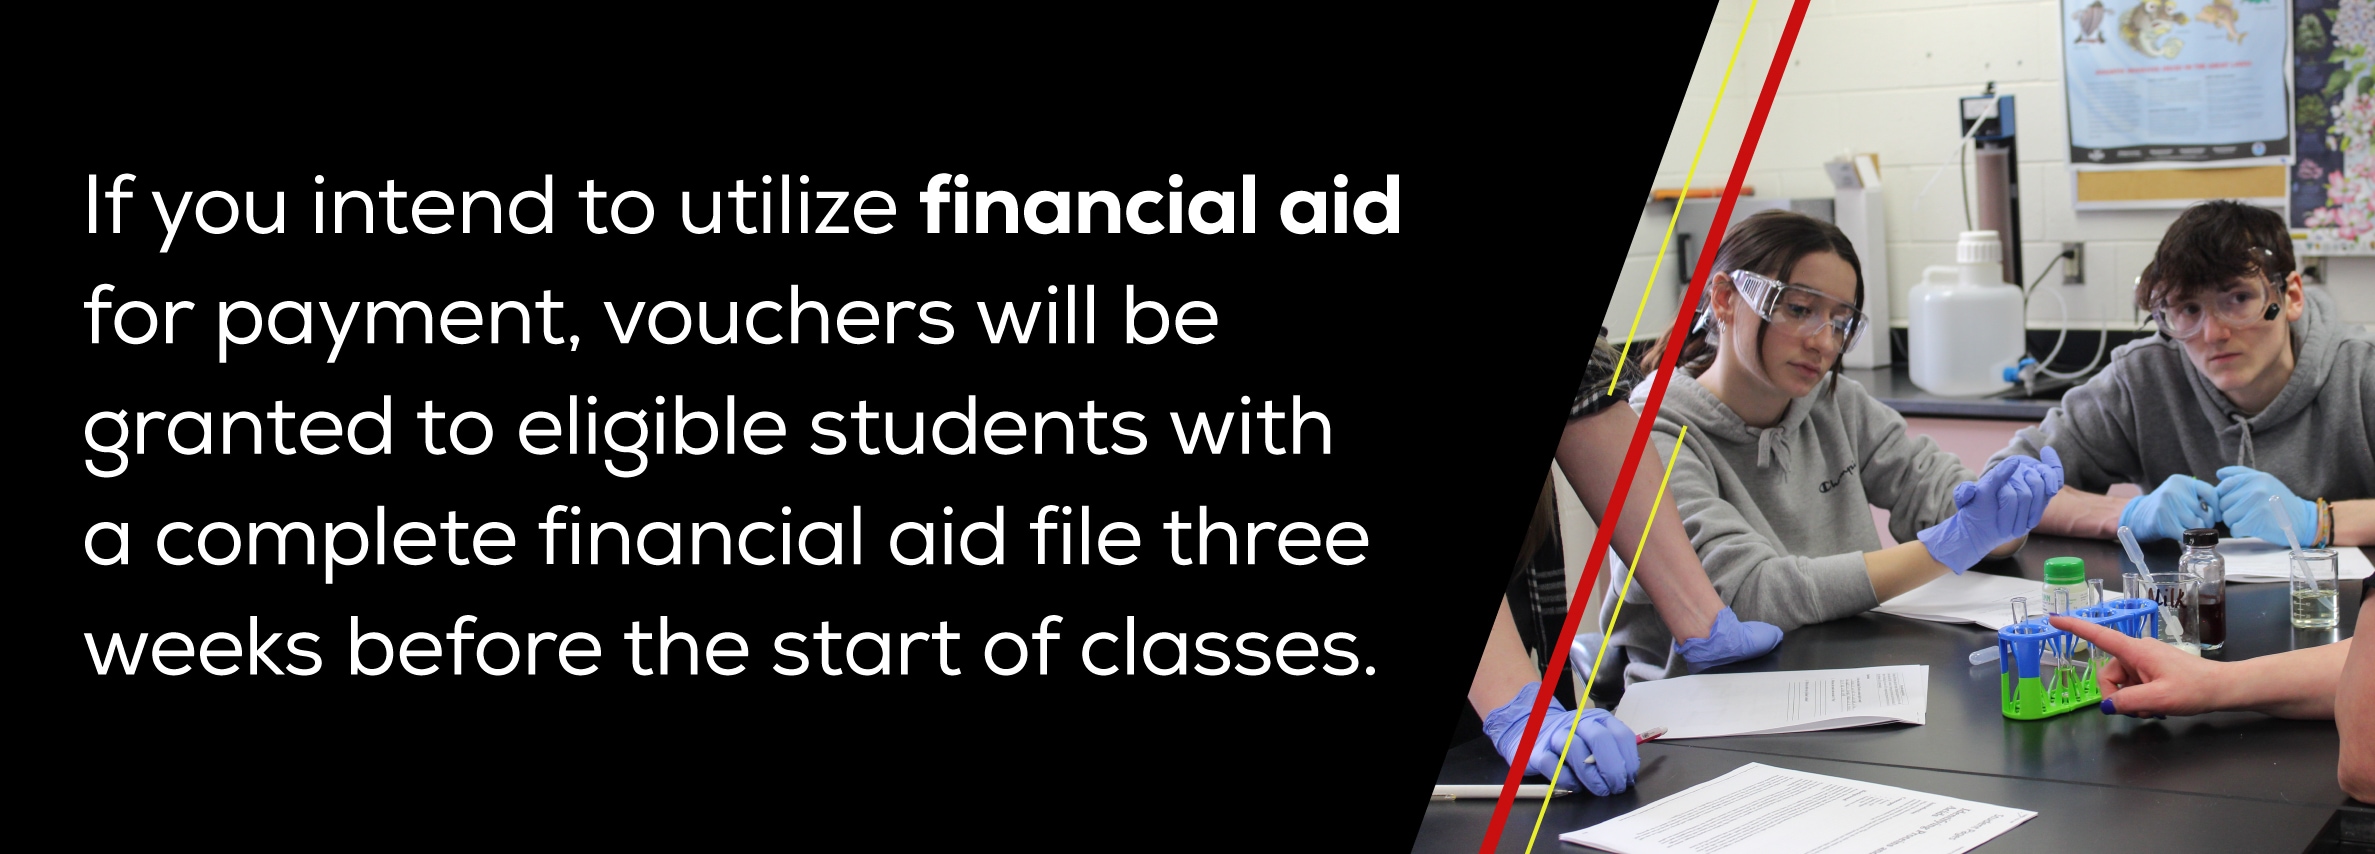 If you intend to utilize financial aid for payment, vouchers will be granted to eligible students with a complete financial aid file three weeks before the start of classes.